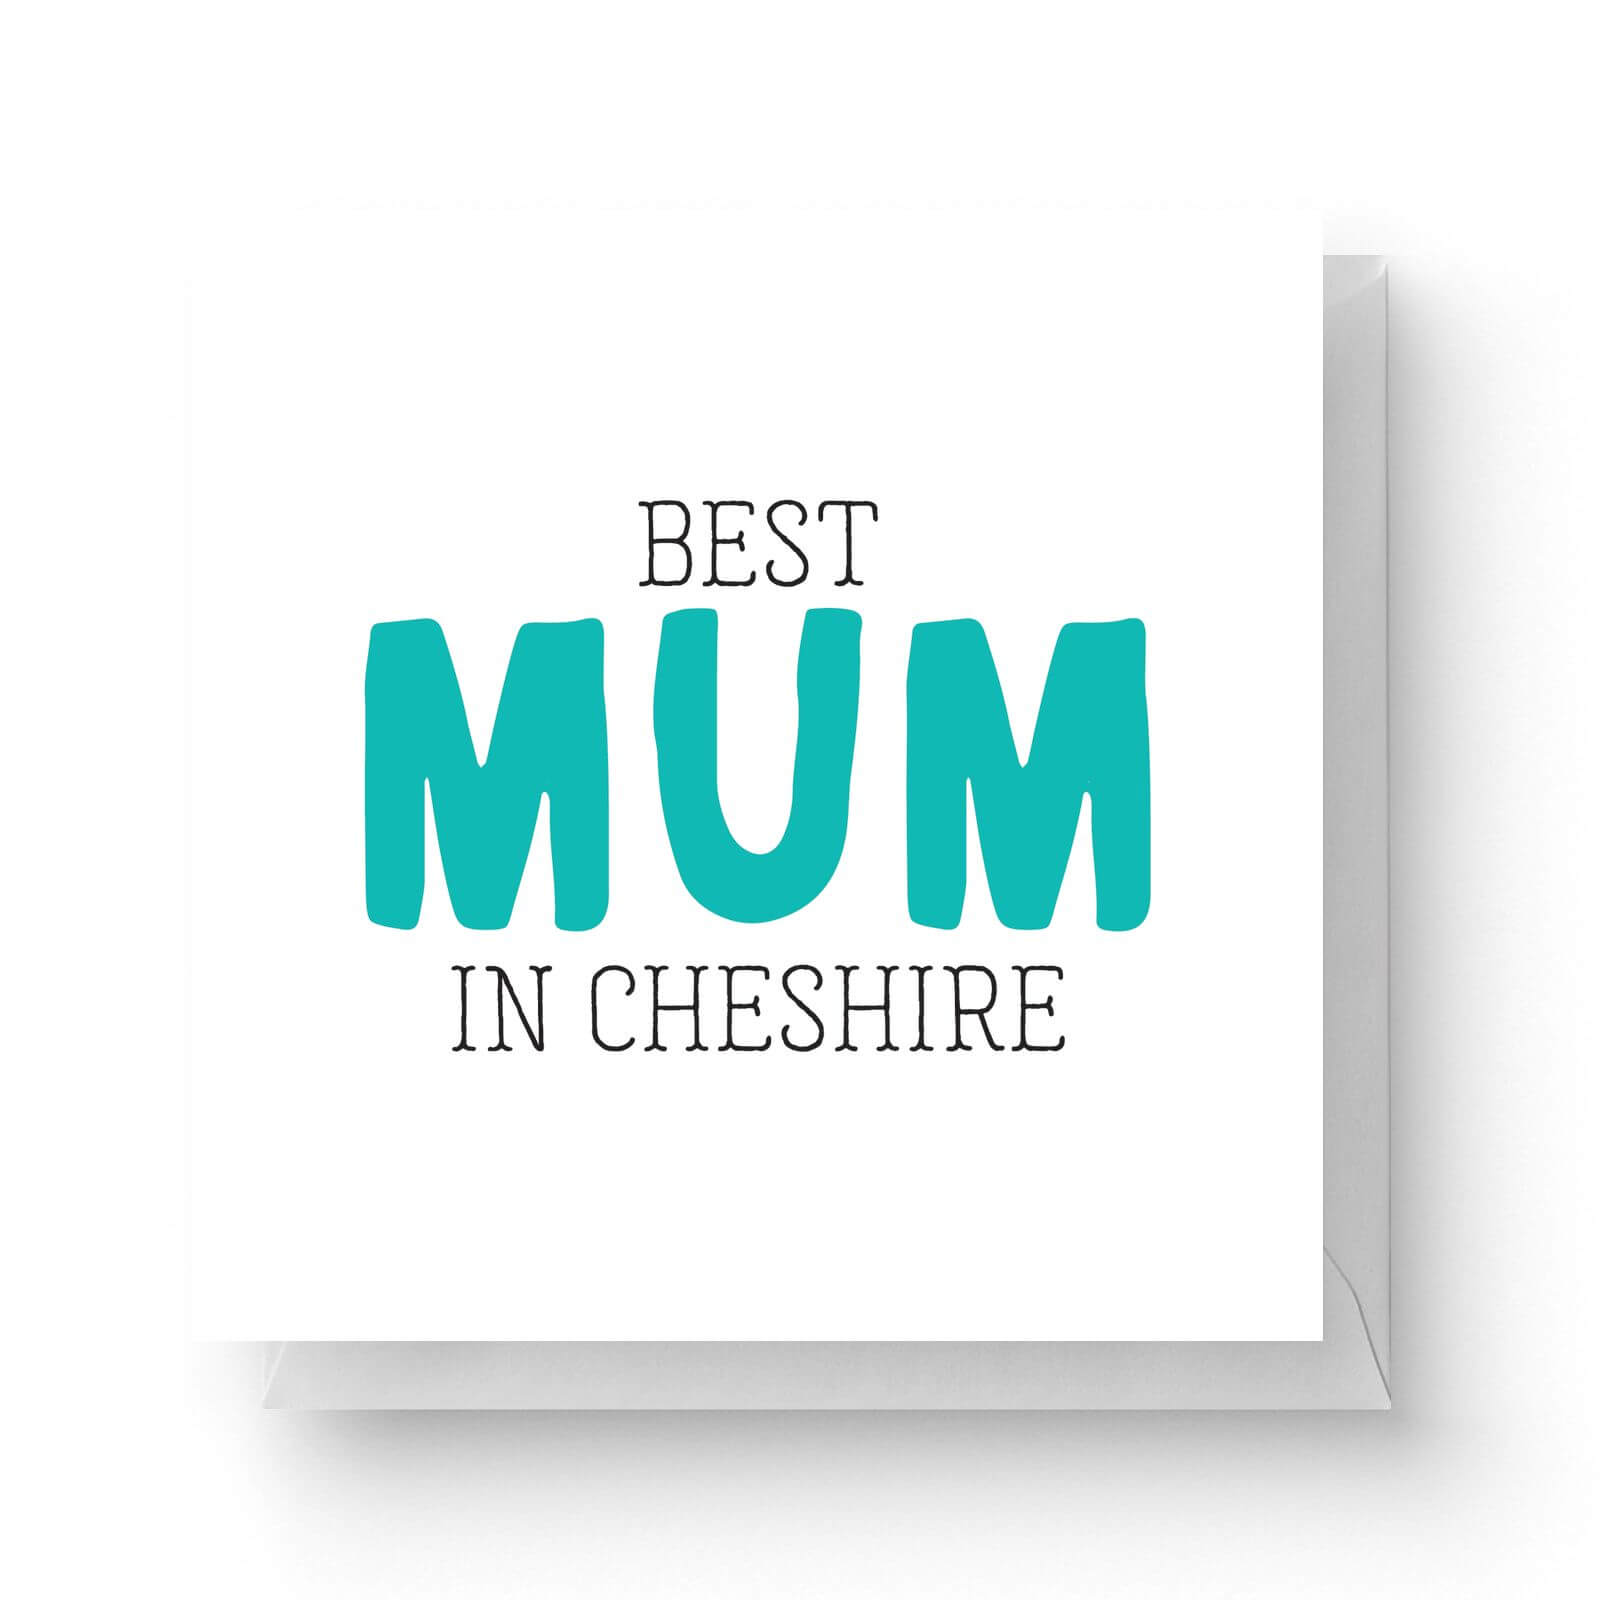 Image of Best Mum In Cheshire Square Greetings Card (14.8cm x 14.8cm)